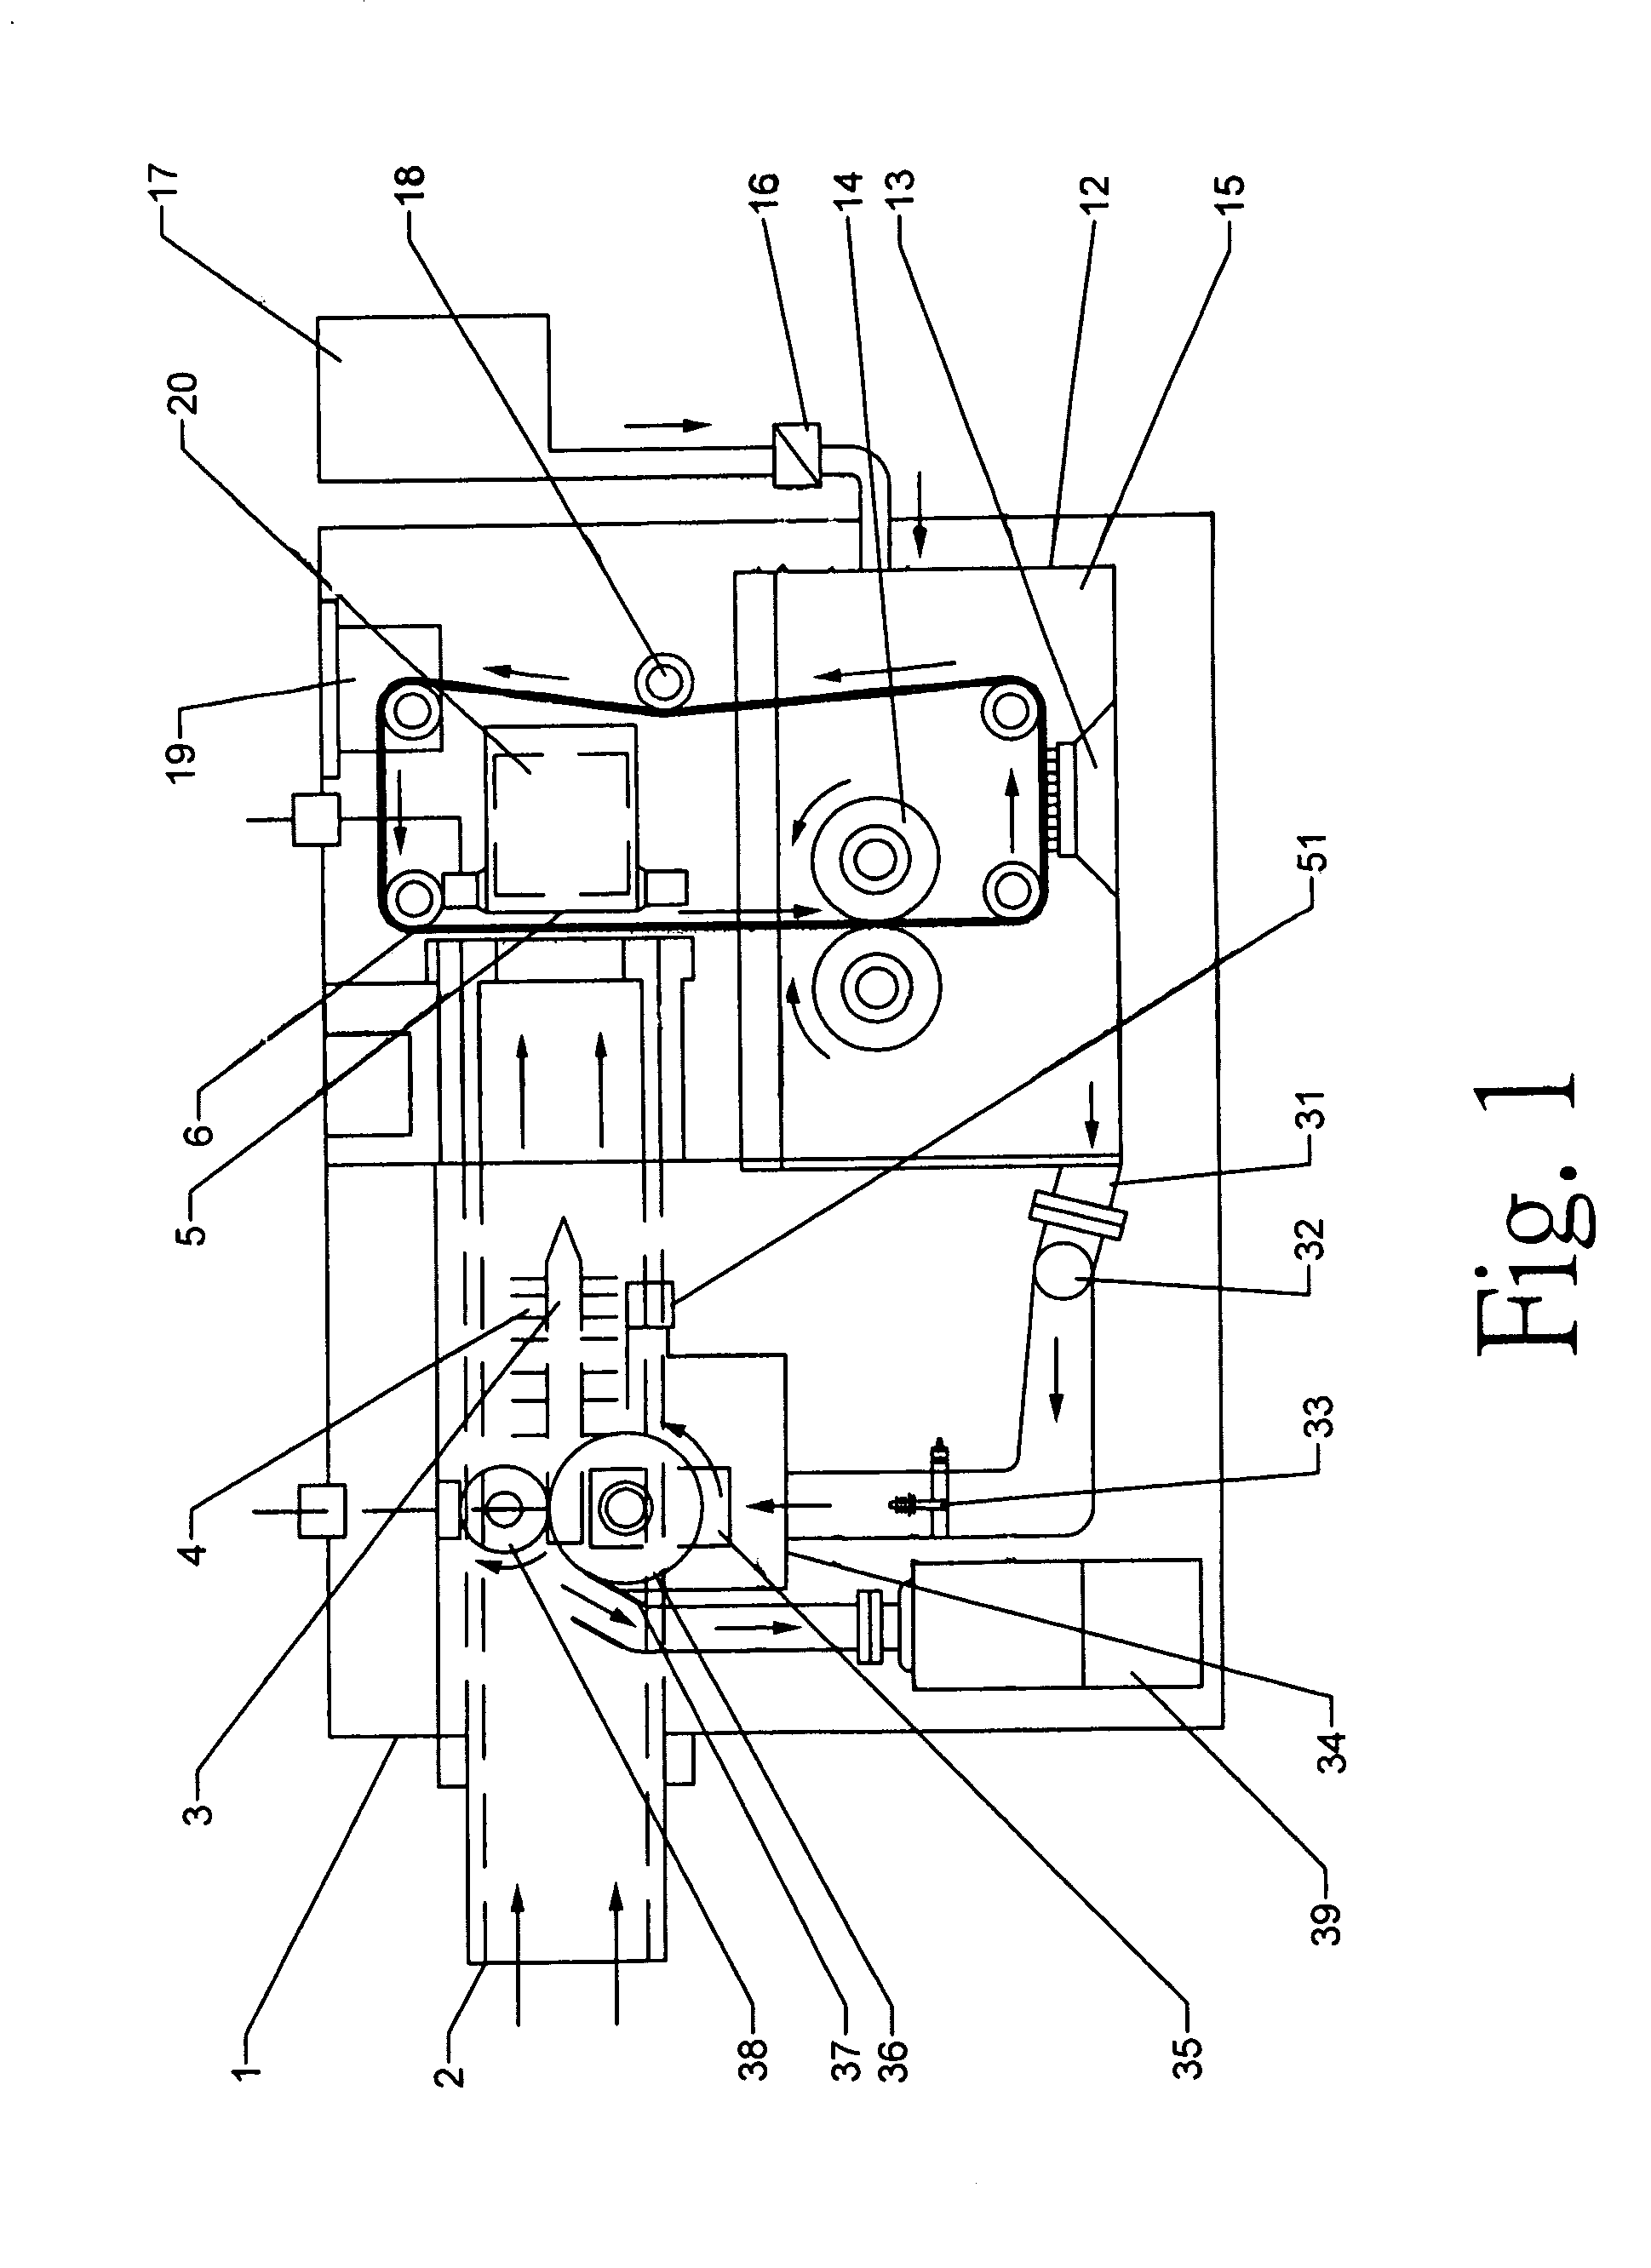 Carbon separation and collection device used for high performance dust collector